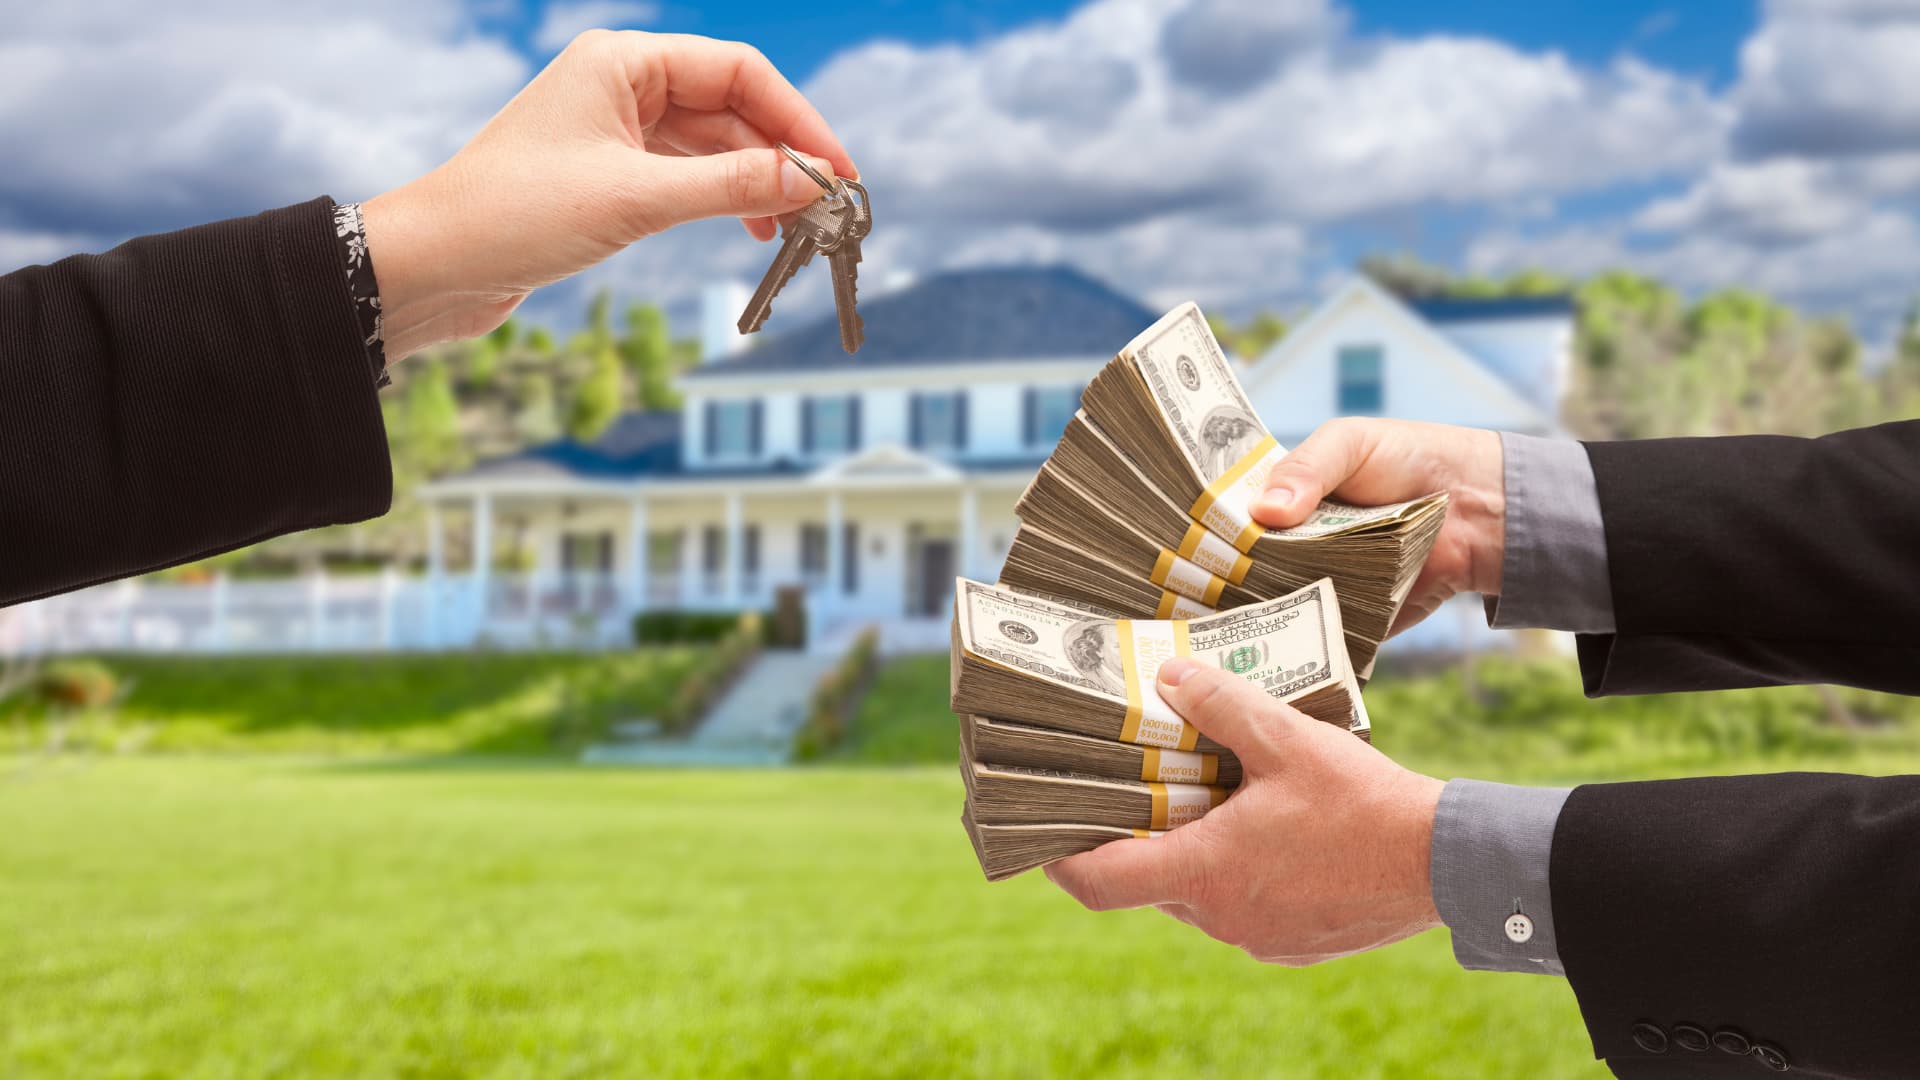 An image of a buyer handing cash over for a all cash real estate transaction.